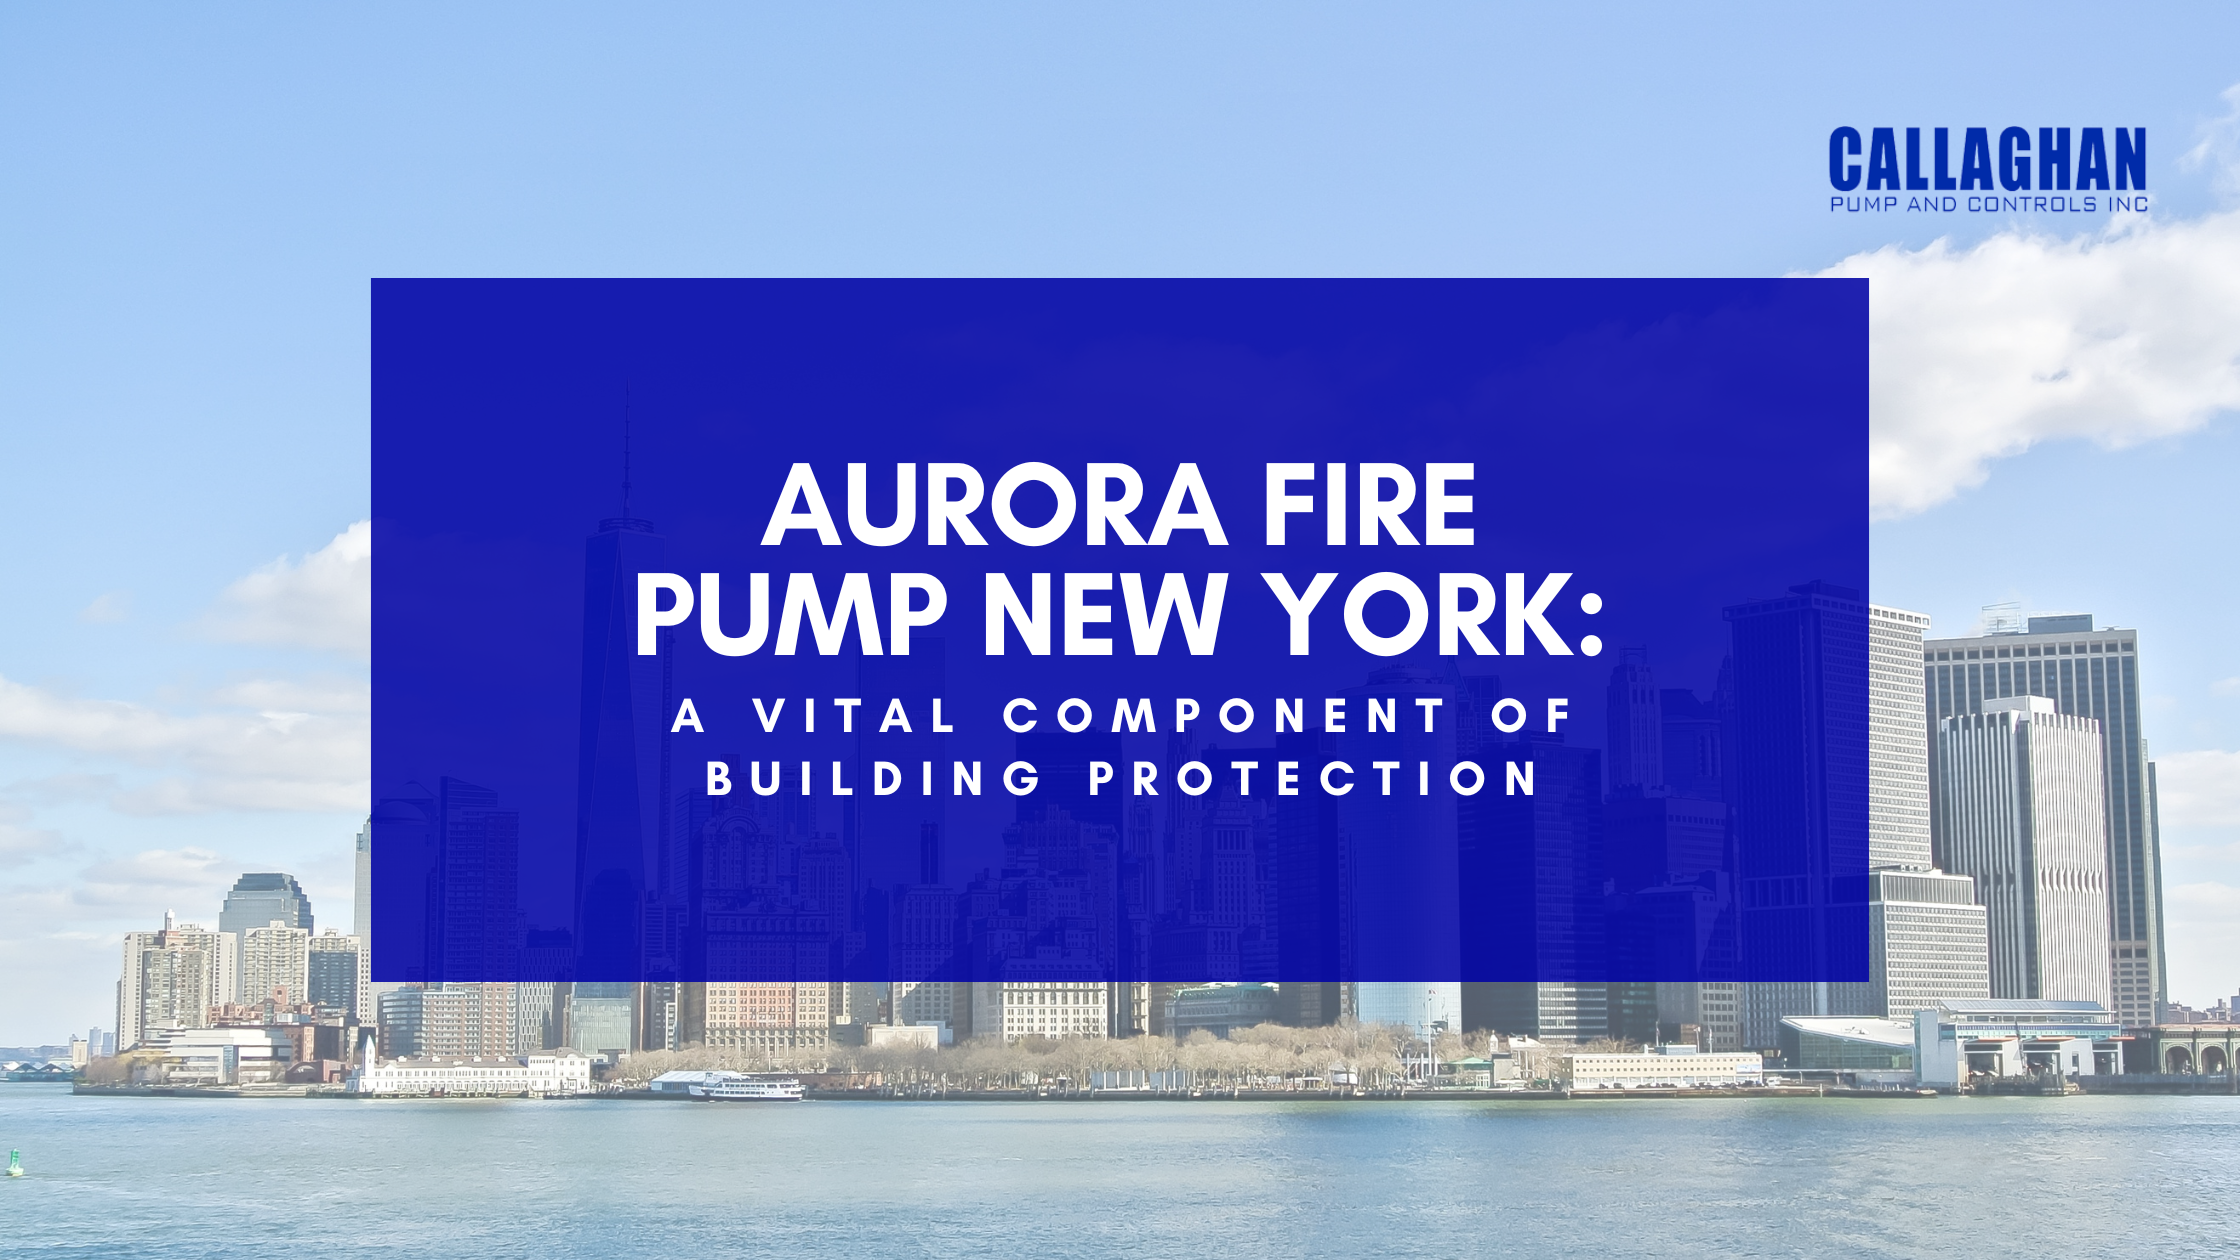 Aurora Fire Pump New York: A Vital Component of Building Protection